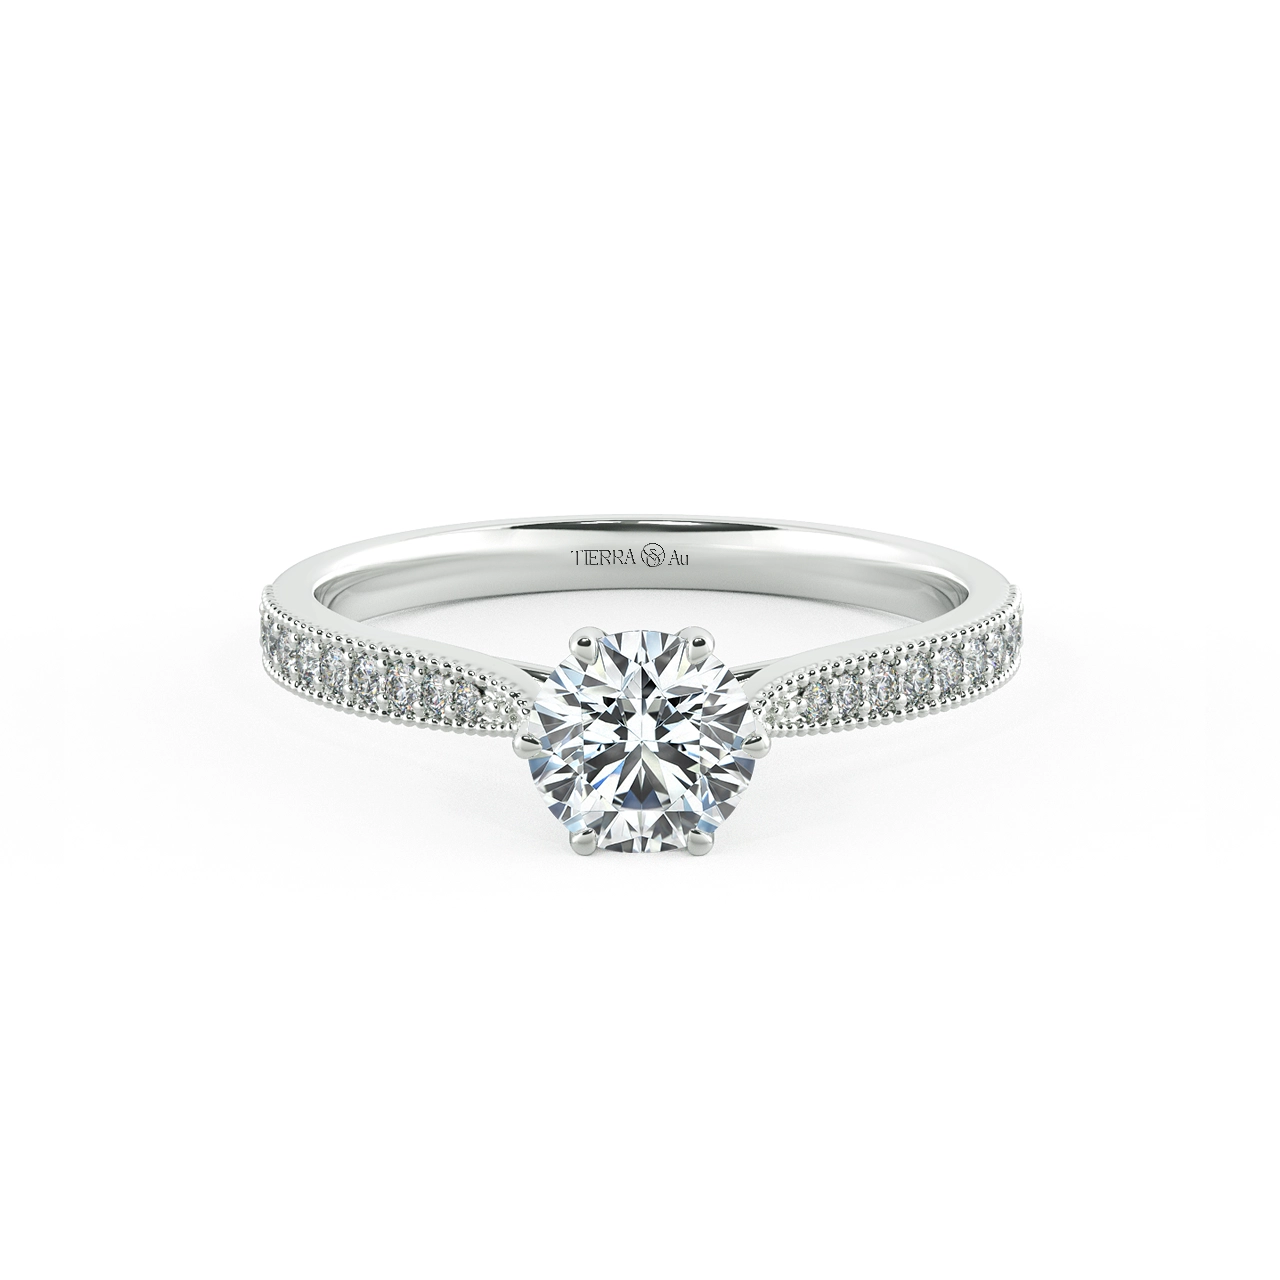 Six Prongs Solitaire Pave Engagement Ring with Milgrain NCH1204 1